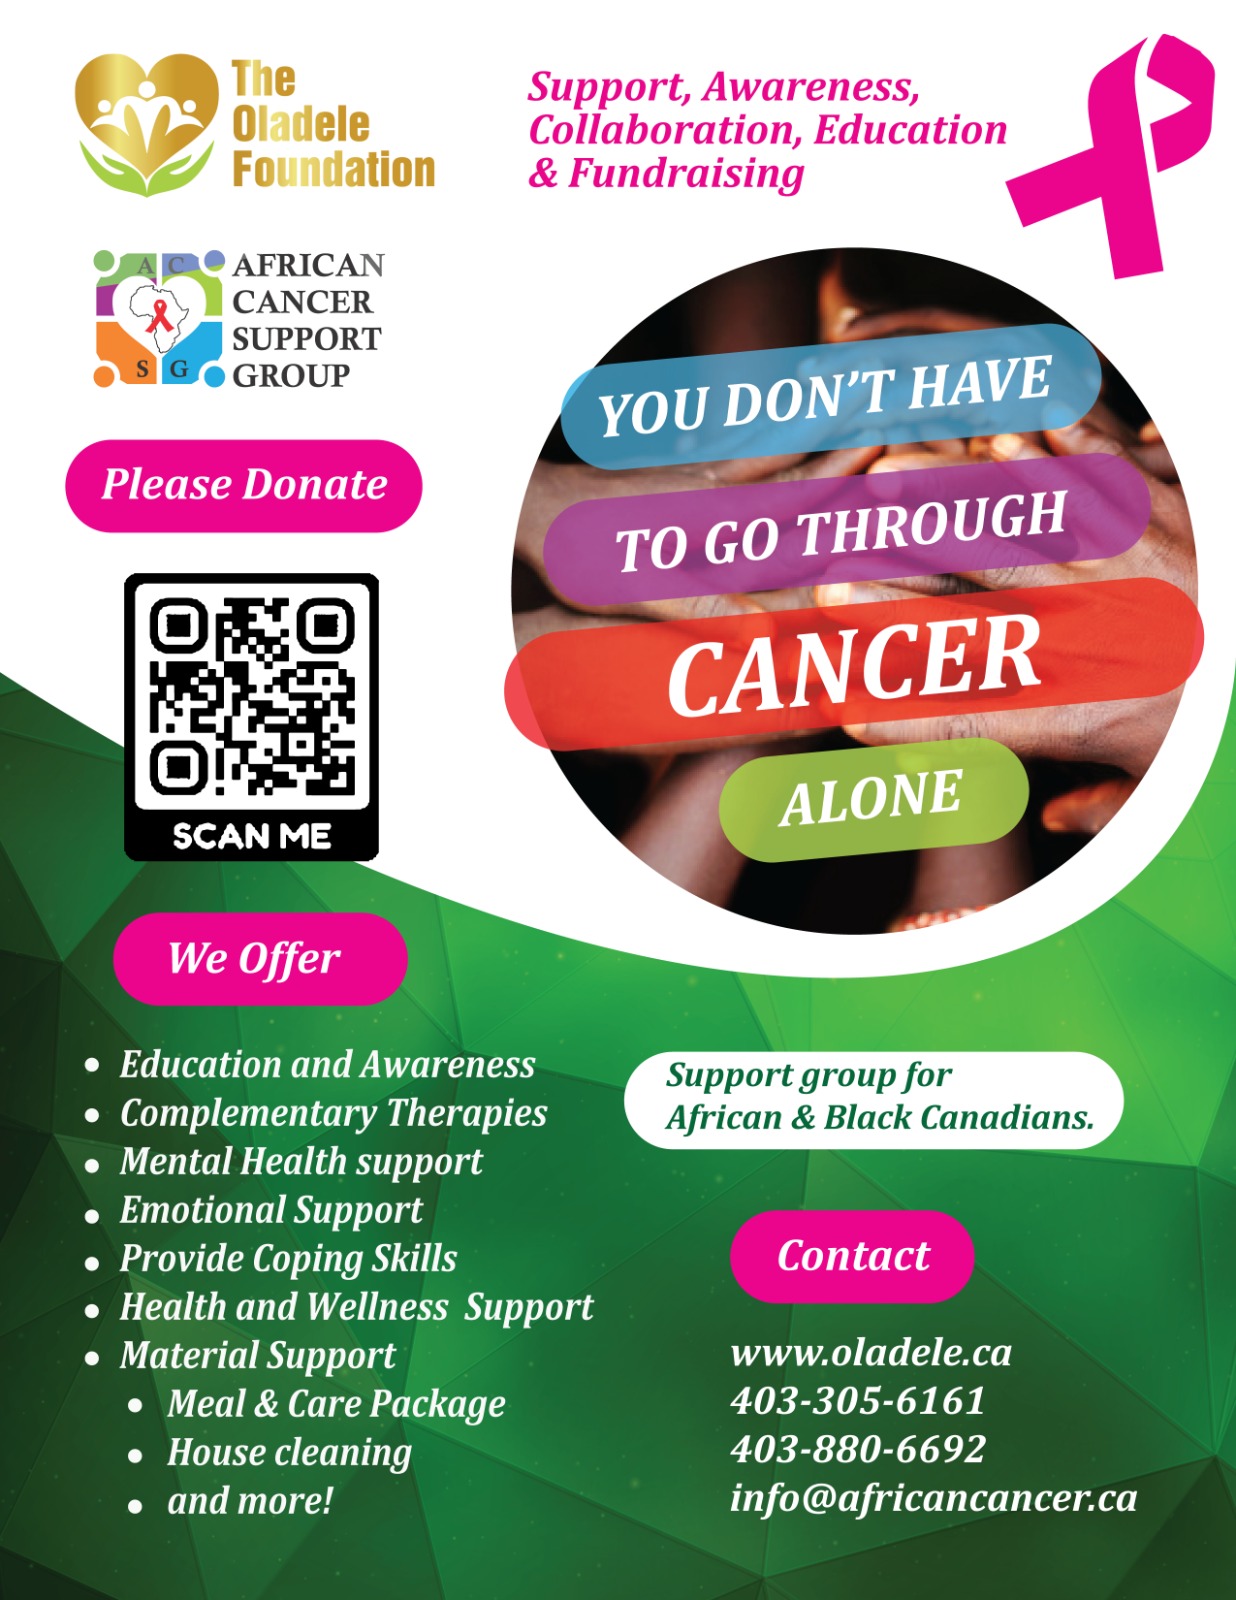 Cancer Support Group services